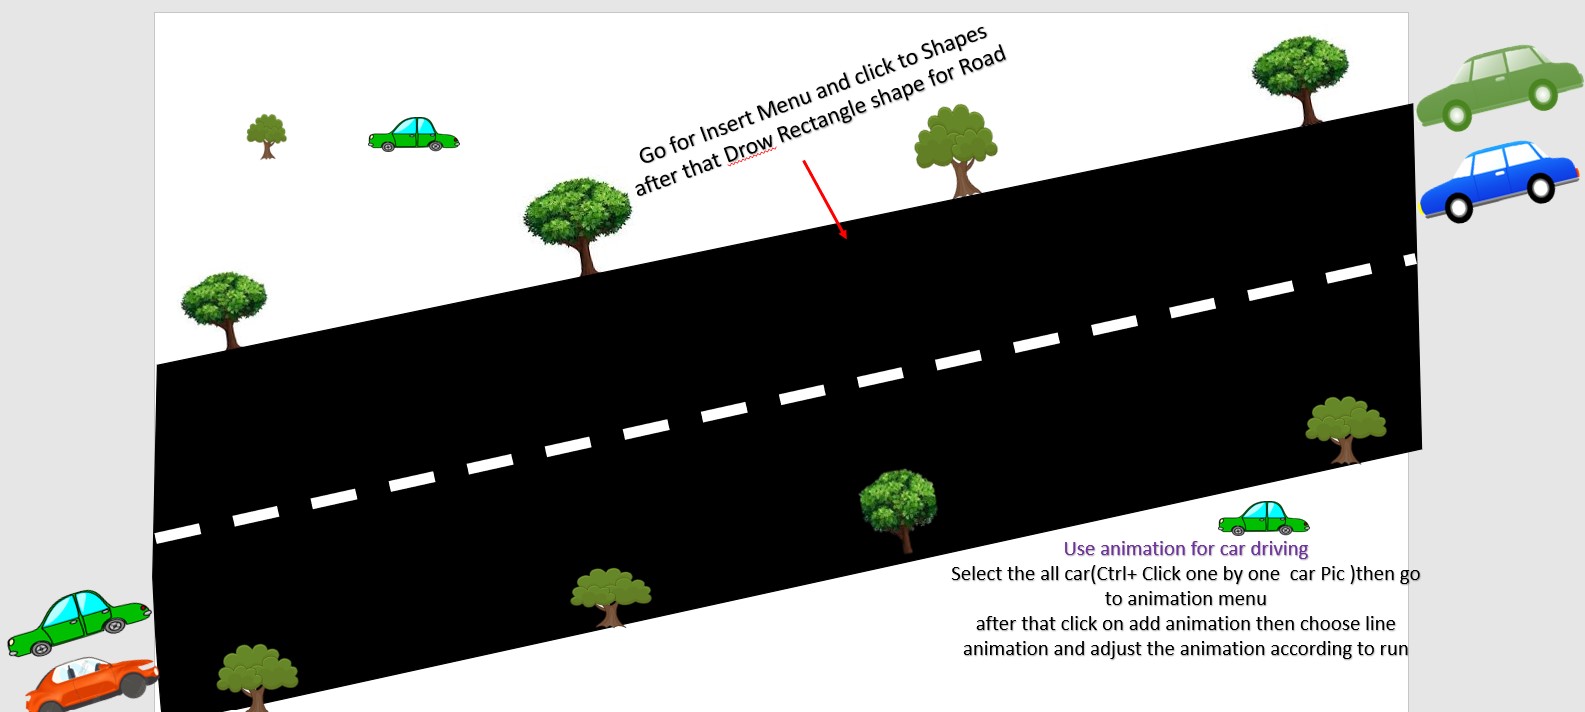 draw rectangle and insert car and tree